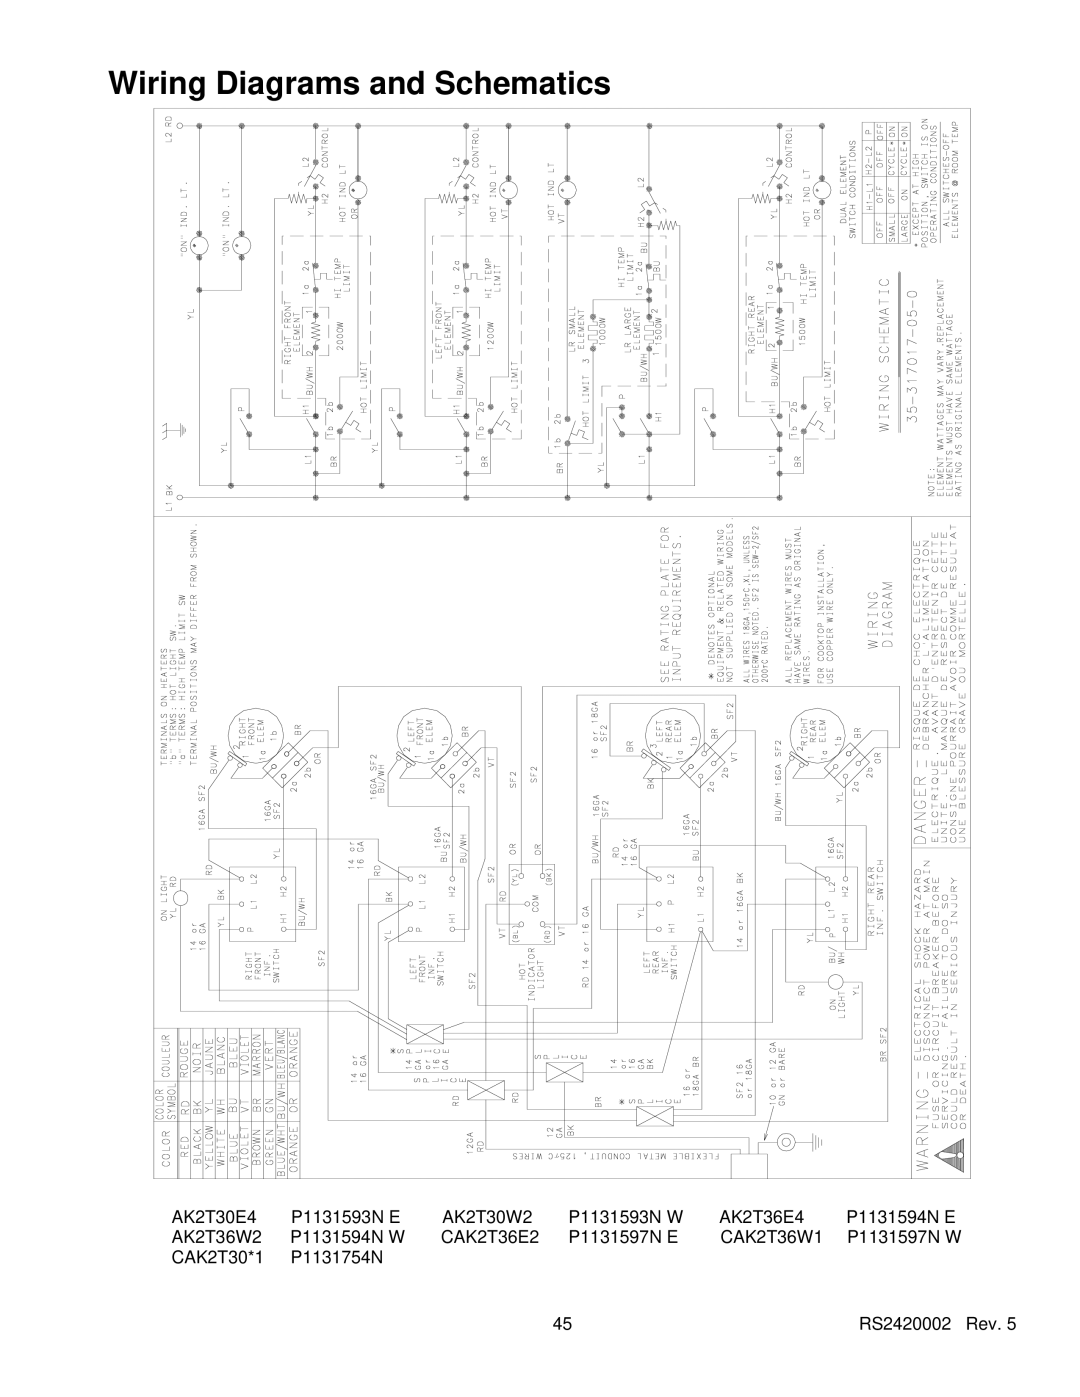 Amana AK2H30, AK2H36E2, AK2HW2, AK2T30/36E1/W1 service manual Wiring Diagrams and Schematics 